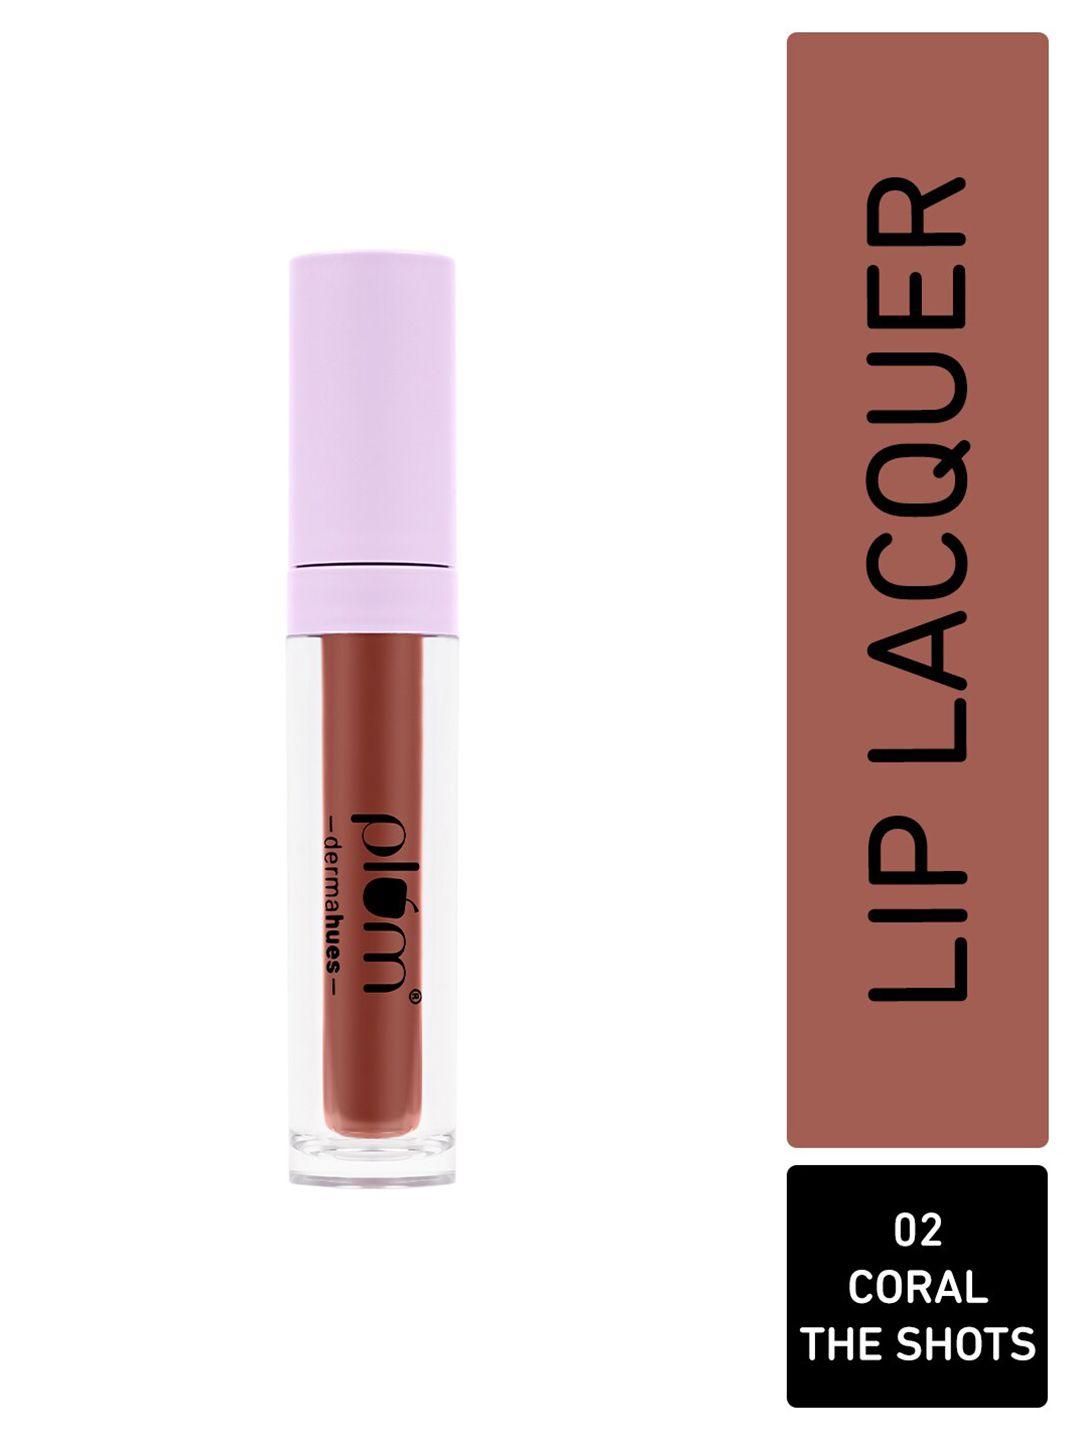 plum glassy glaze 3-in-1 velvety smooth lip lacquer with jojoba 4.5ml - coral the shots 02